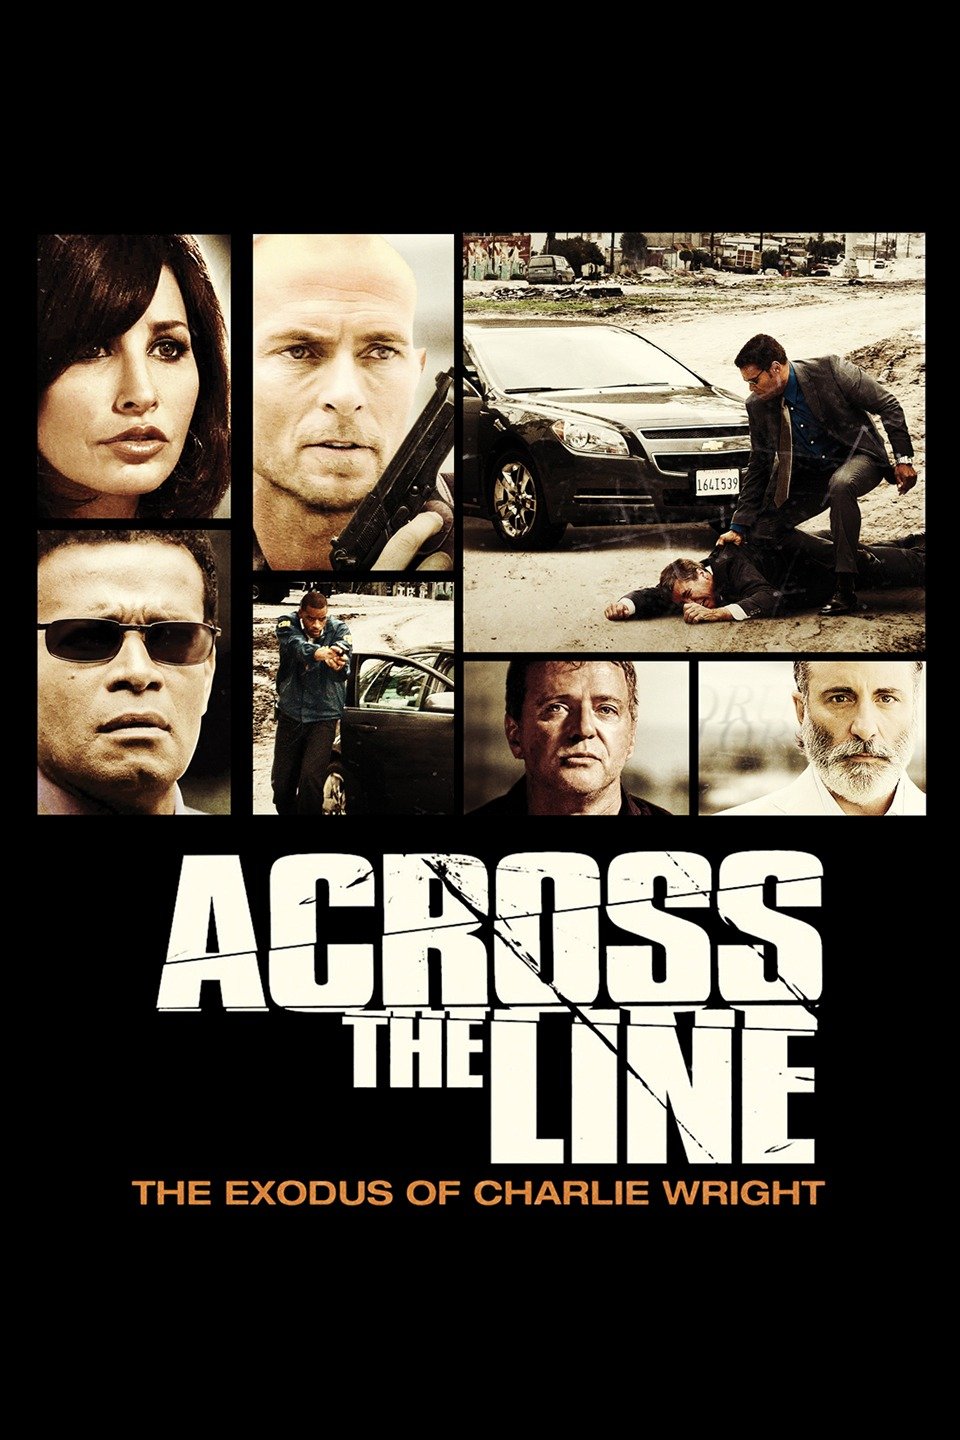 Across The Line: The exodus of Charlie Wright [HD] (2011)